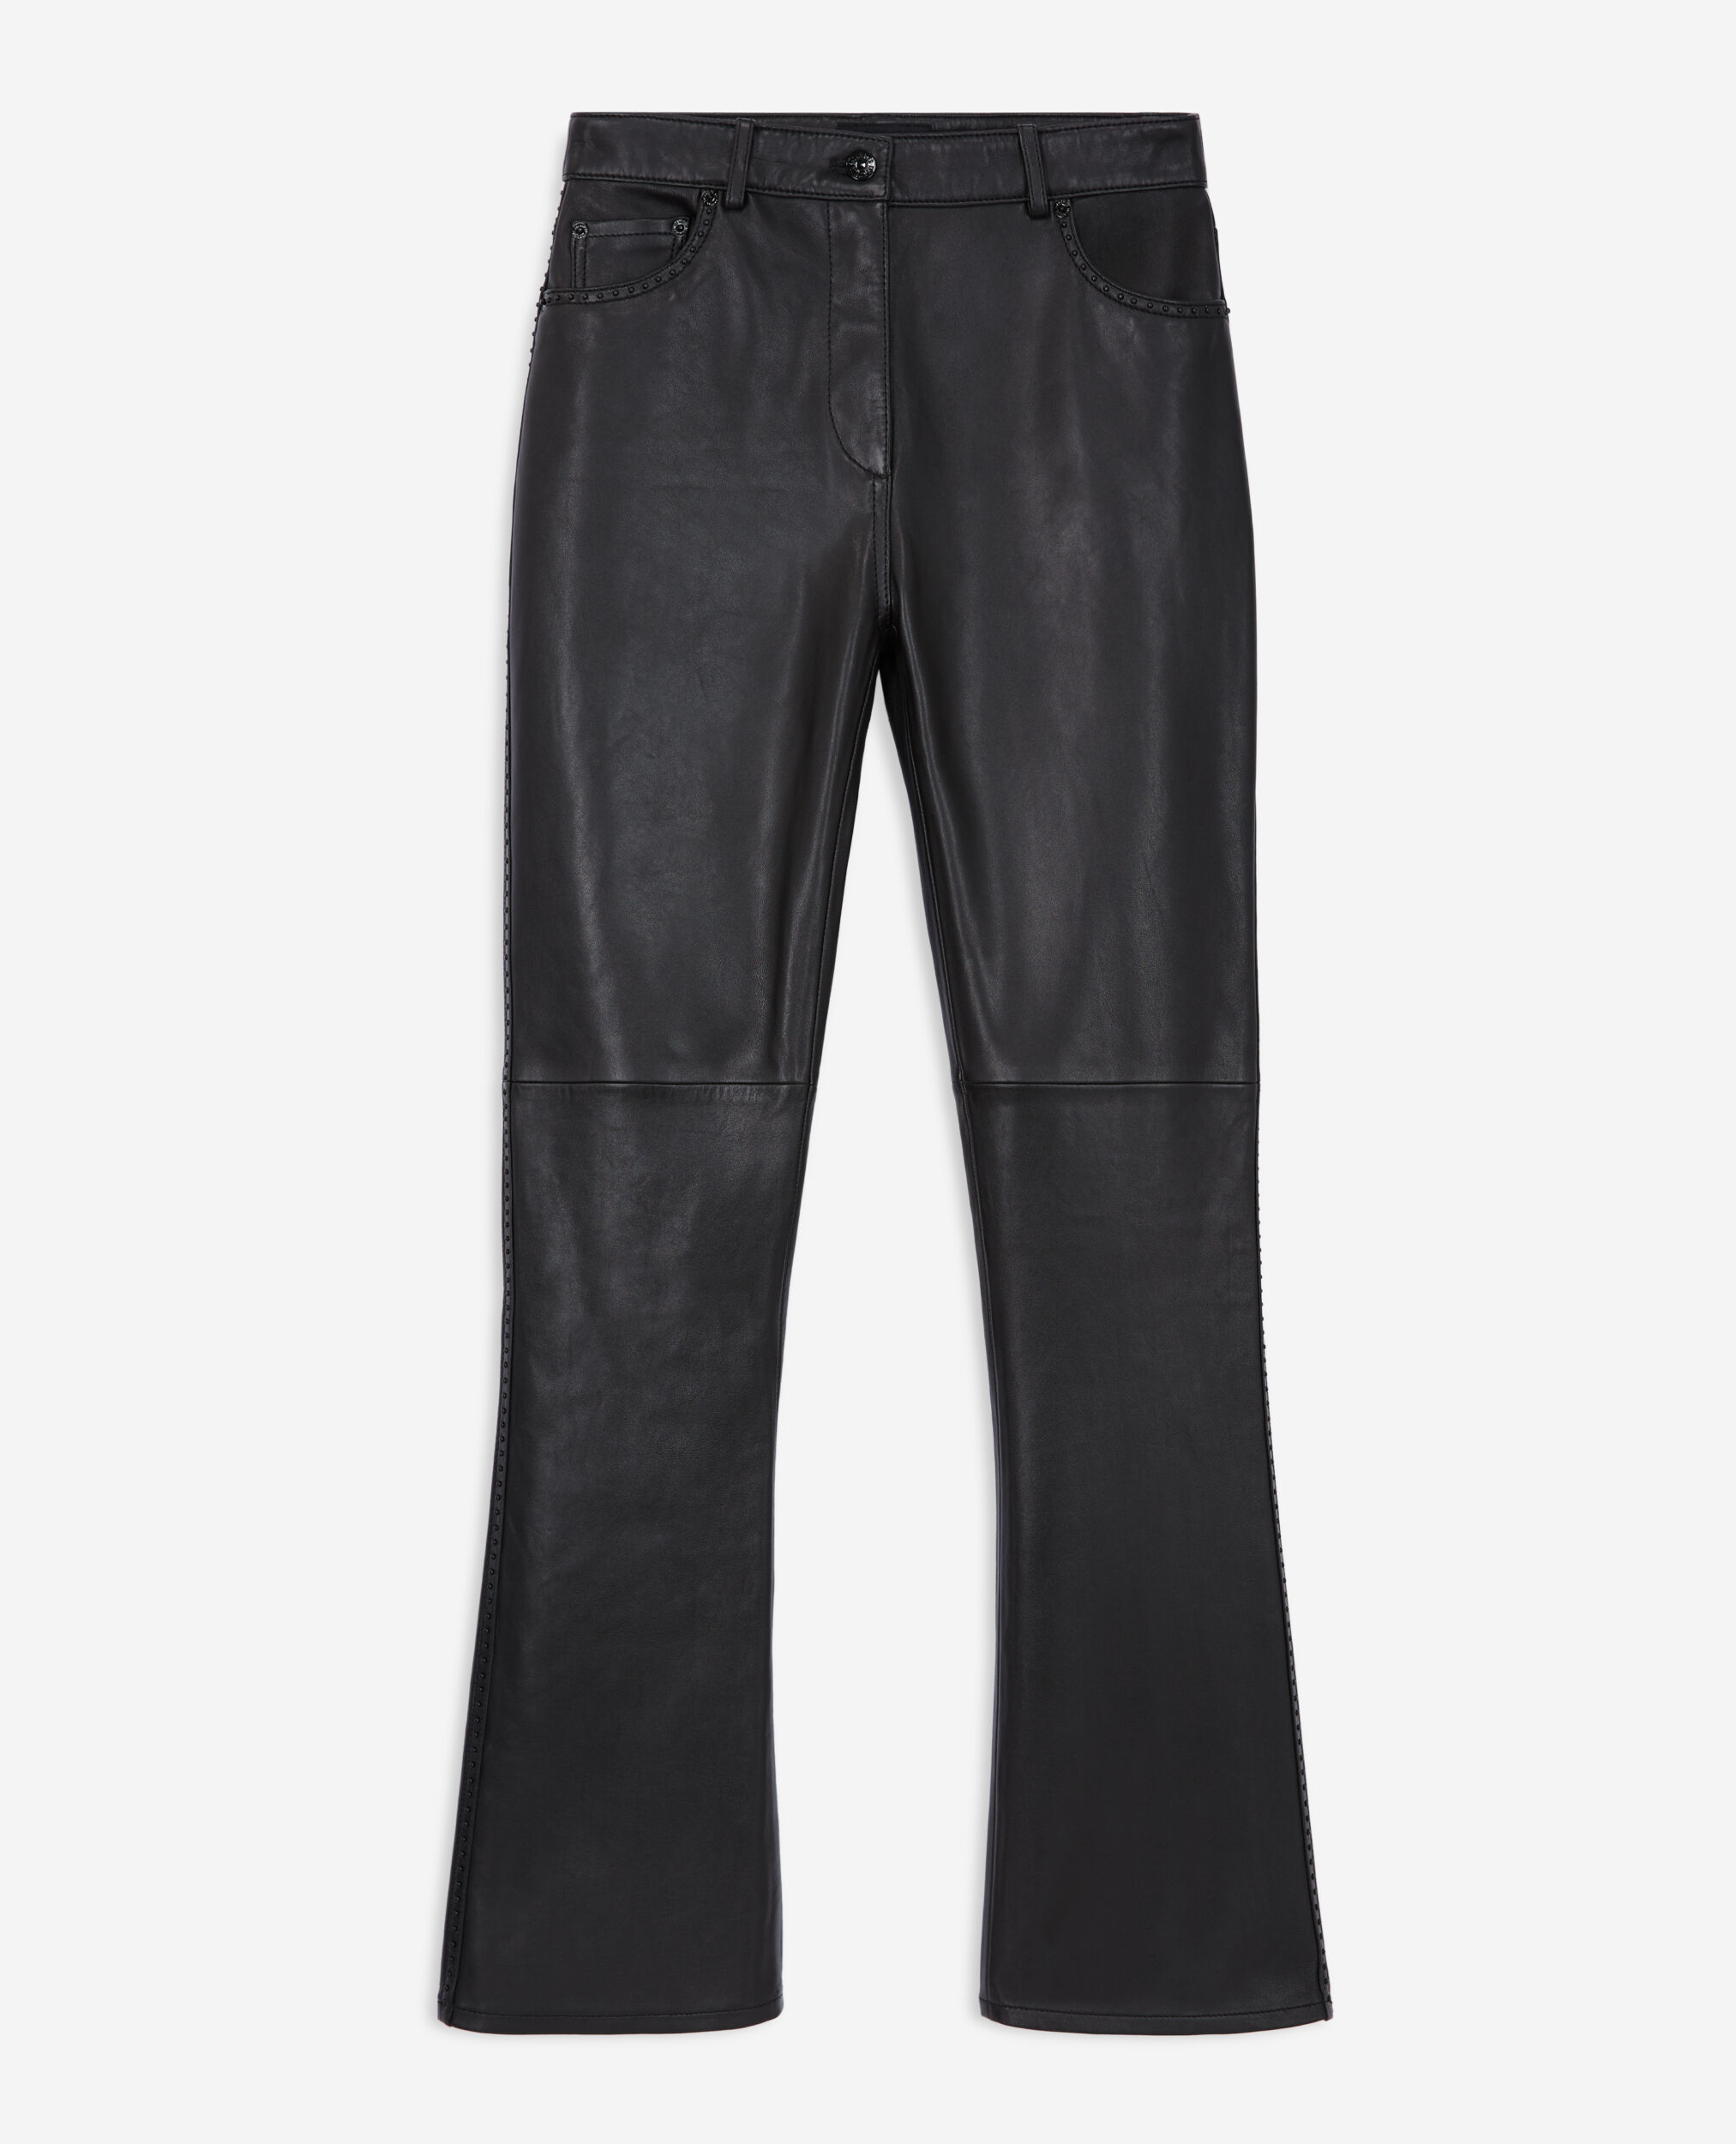 Black leather pants with studs, BLACK, hi-res image number null